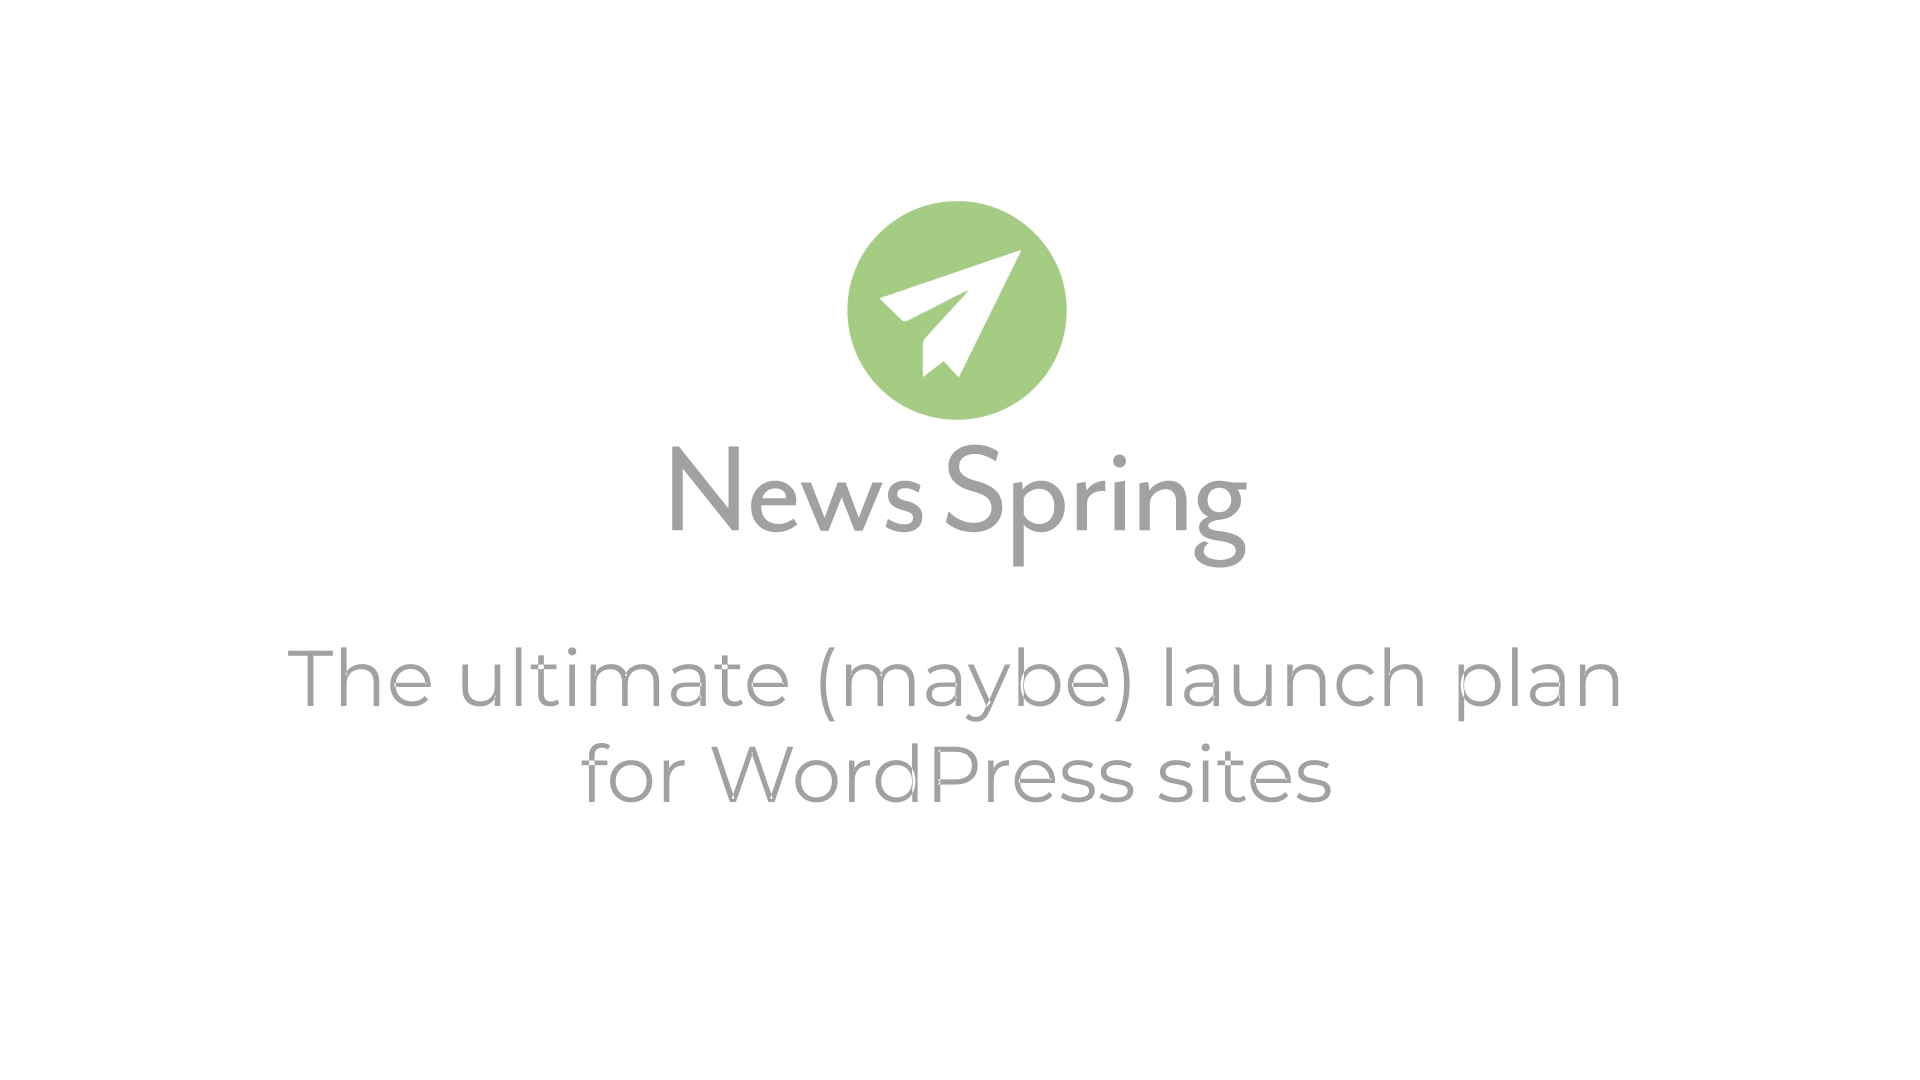 The ultimate (maybe) launch plan for WordPress sites